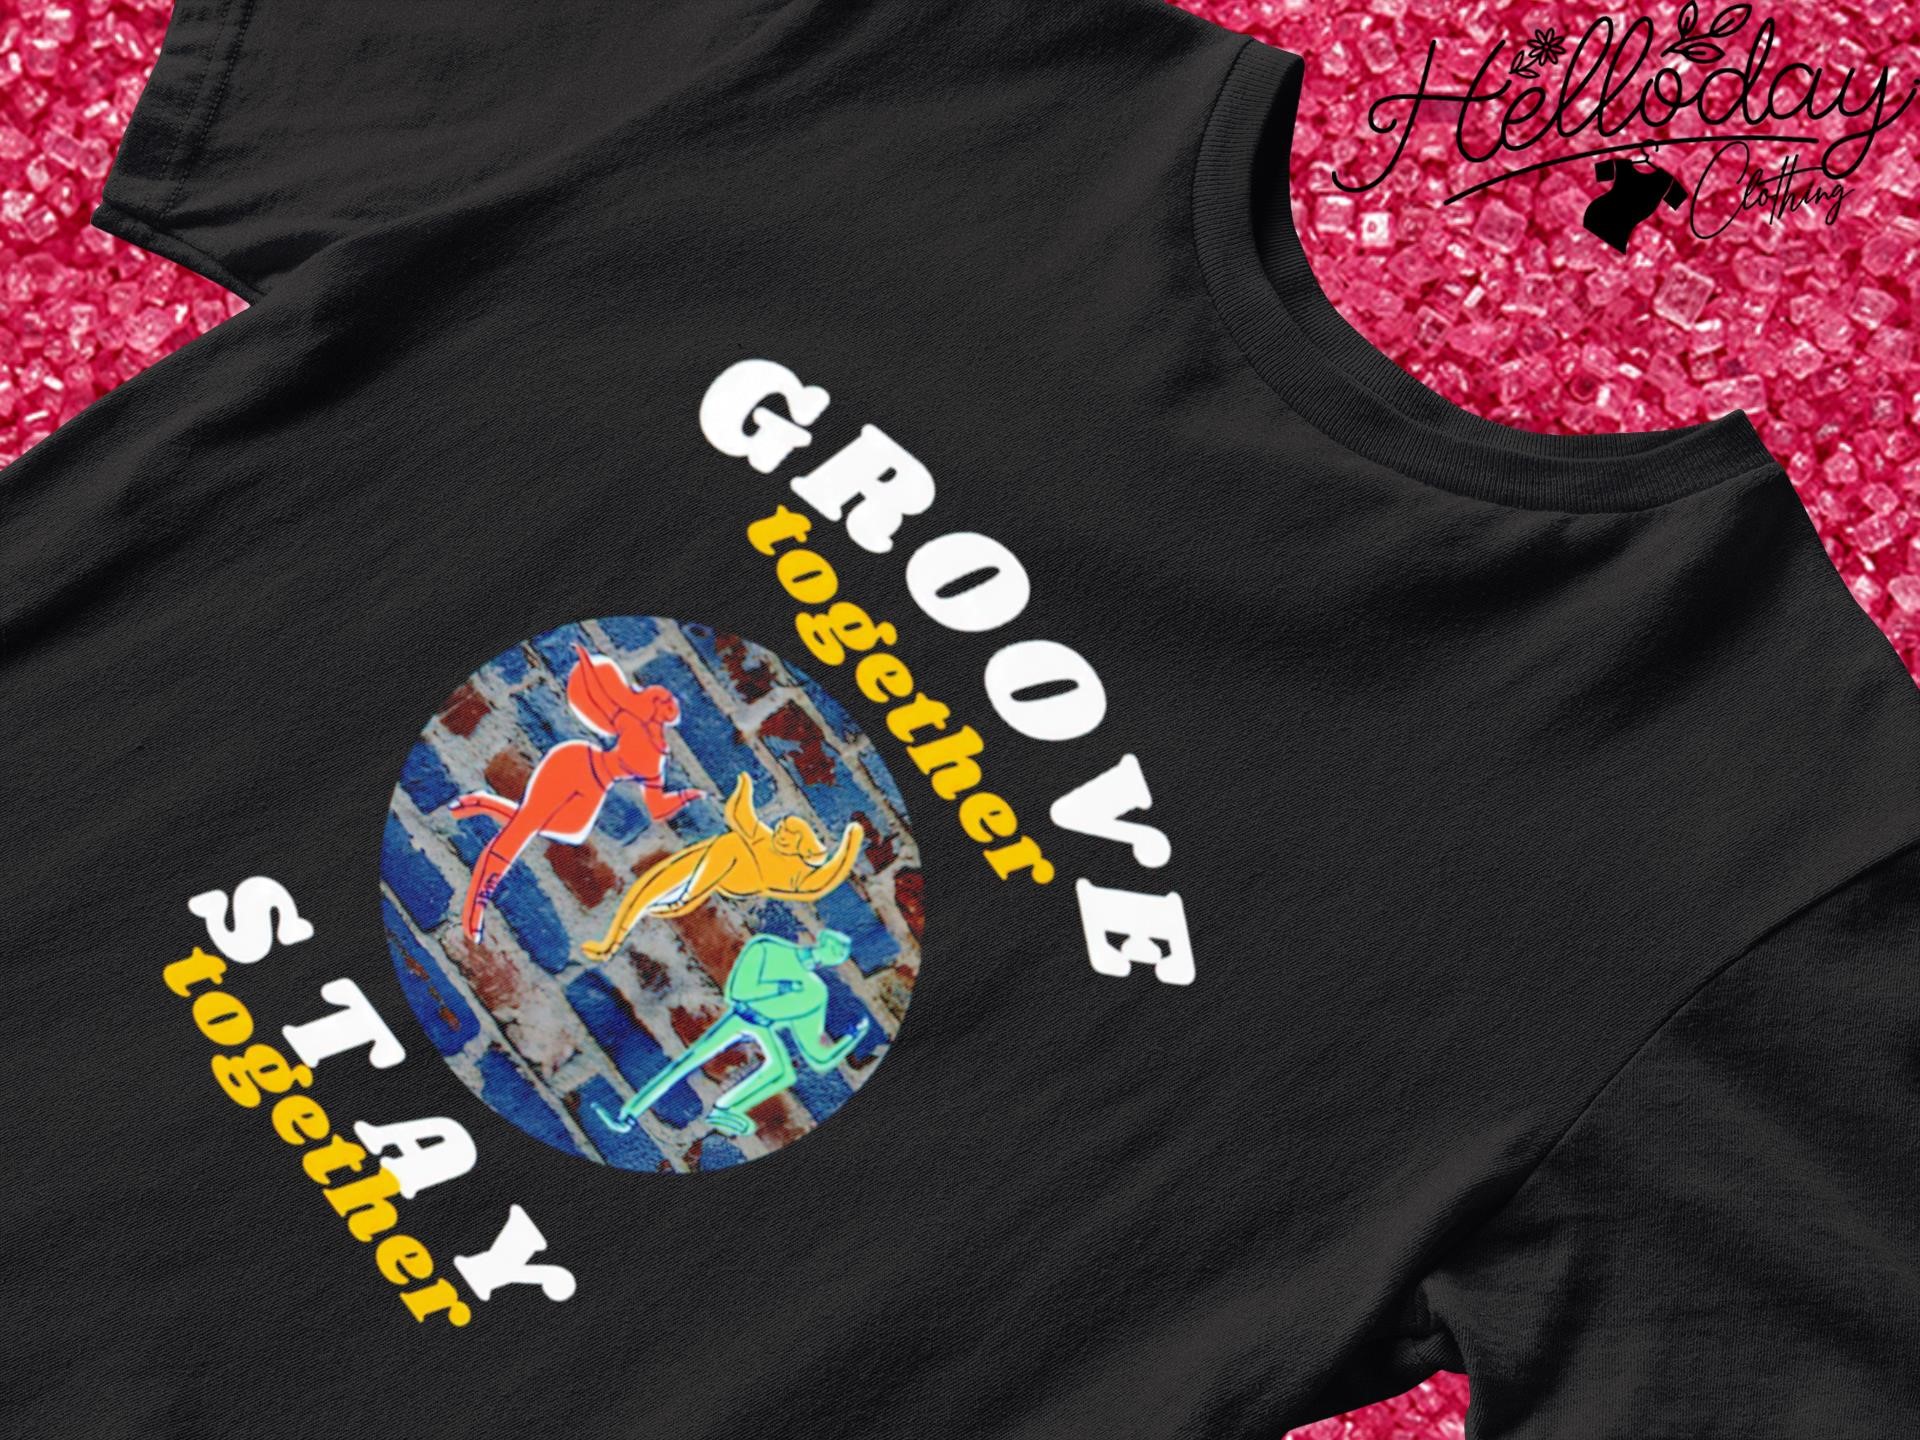 Groove together stay together dance shirt